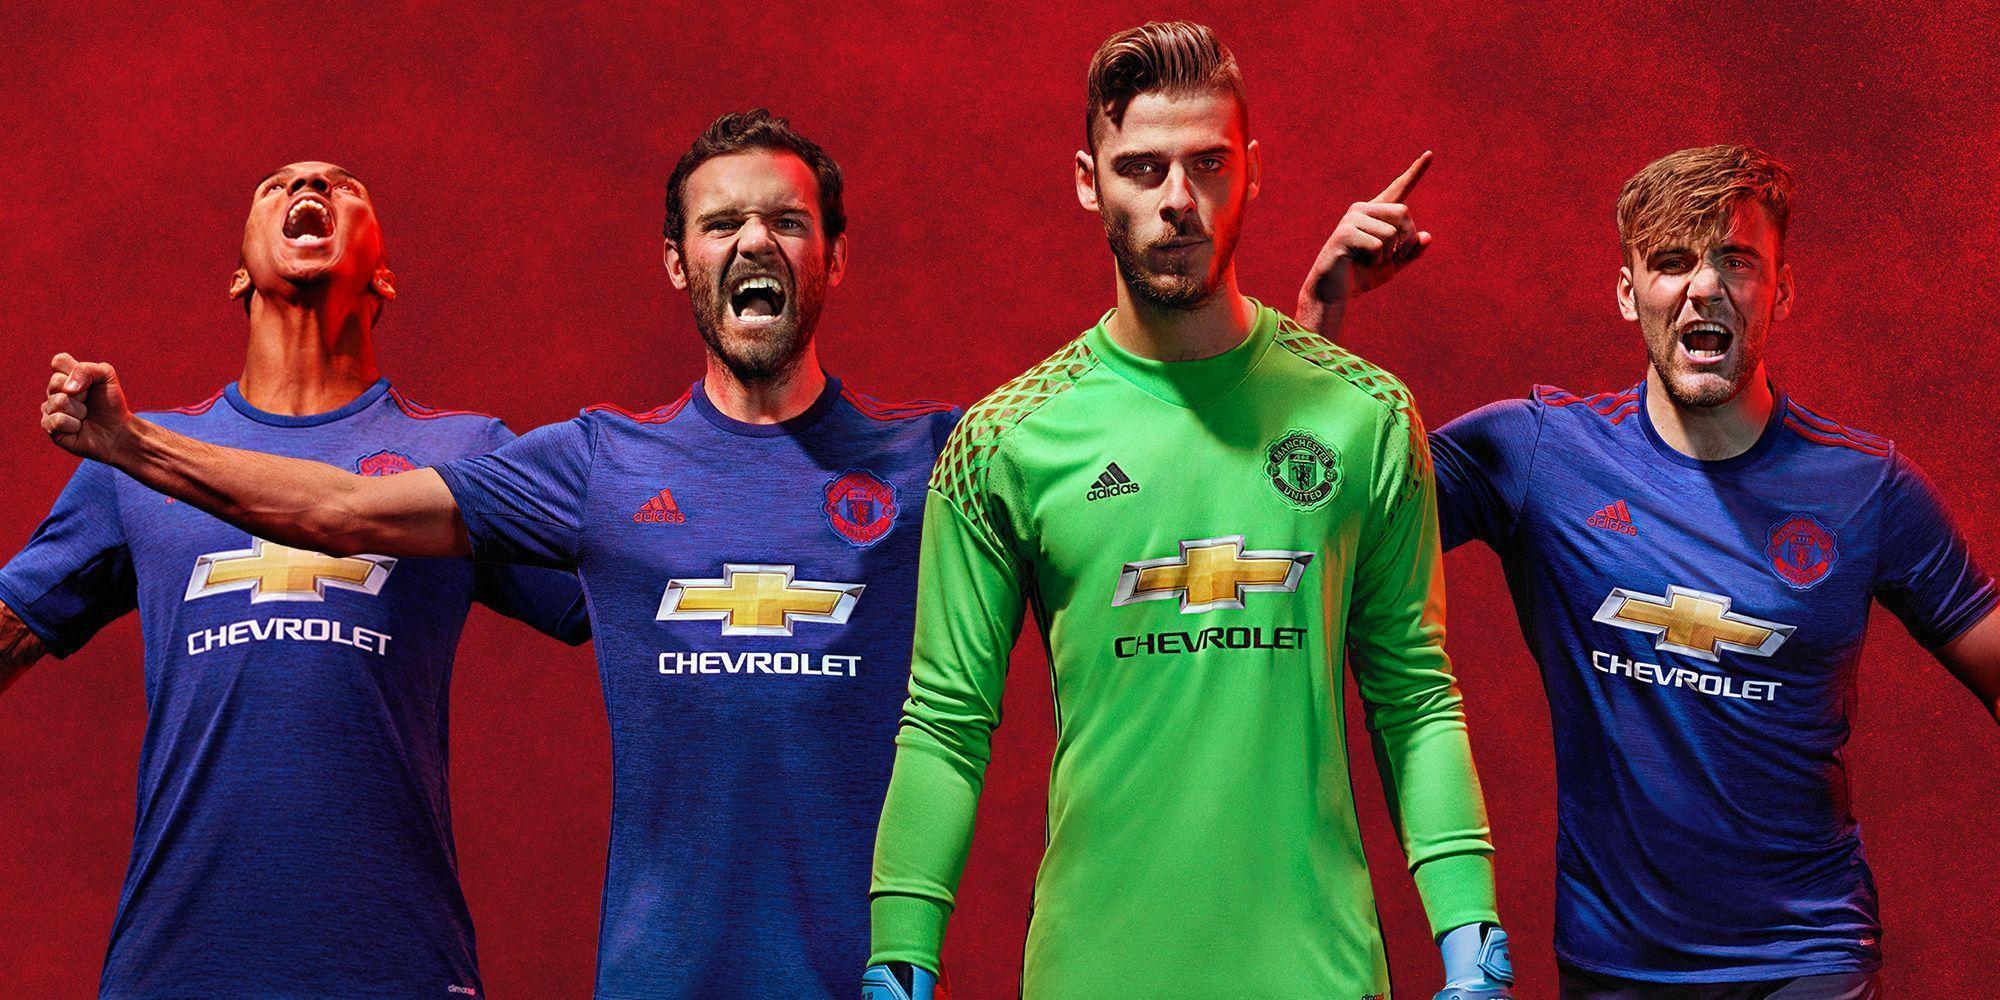 Adidas And Manchester United Reveal New Blue Away Kit For 2016 17